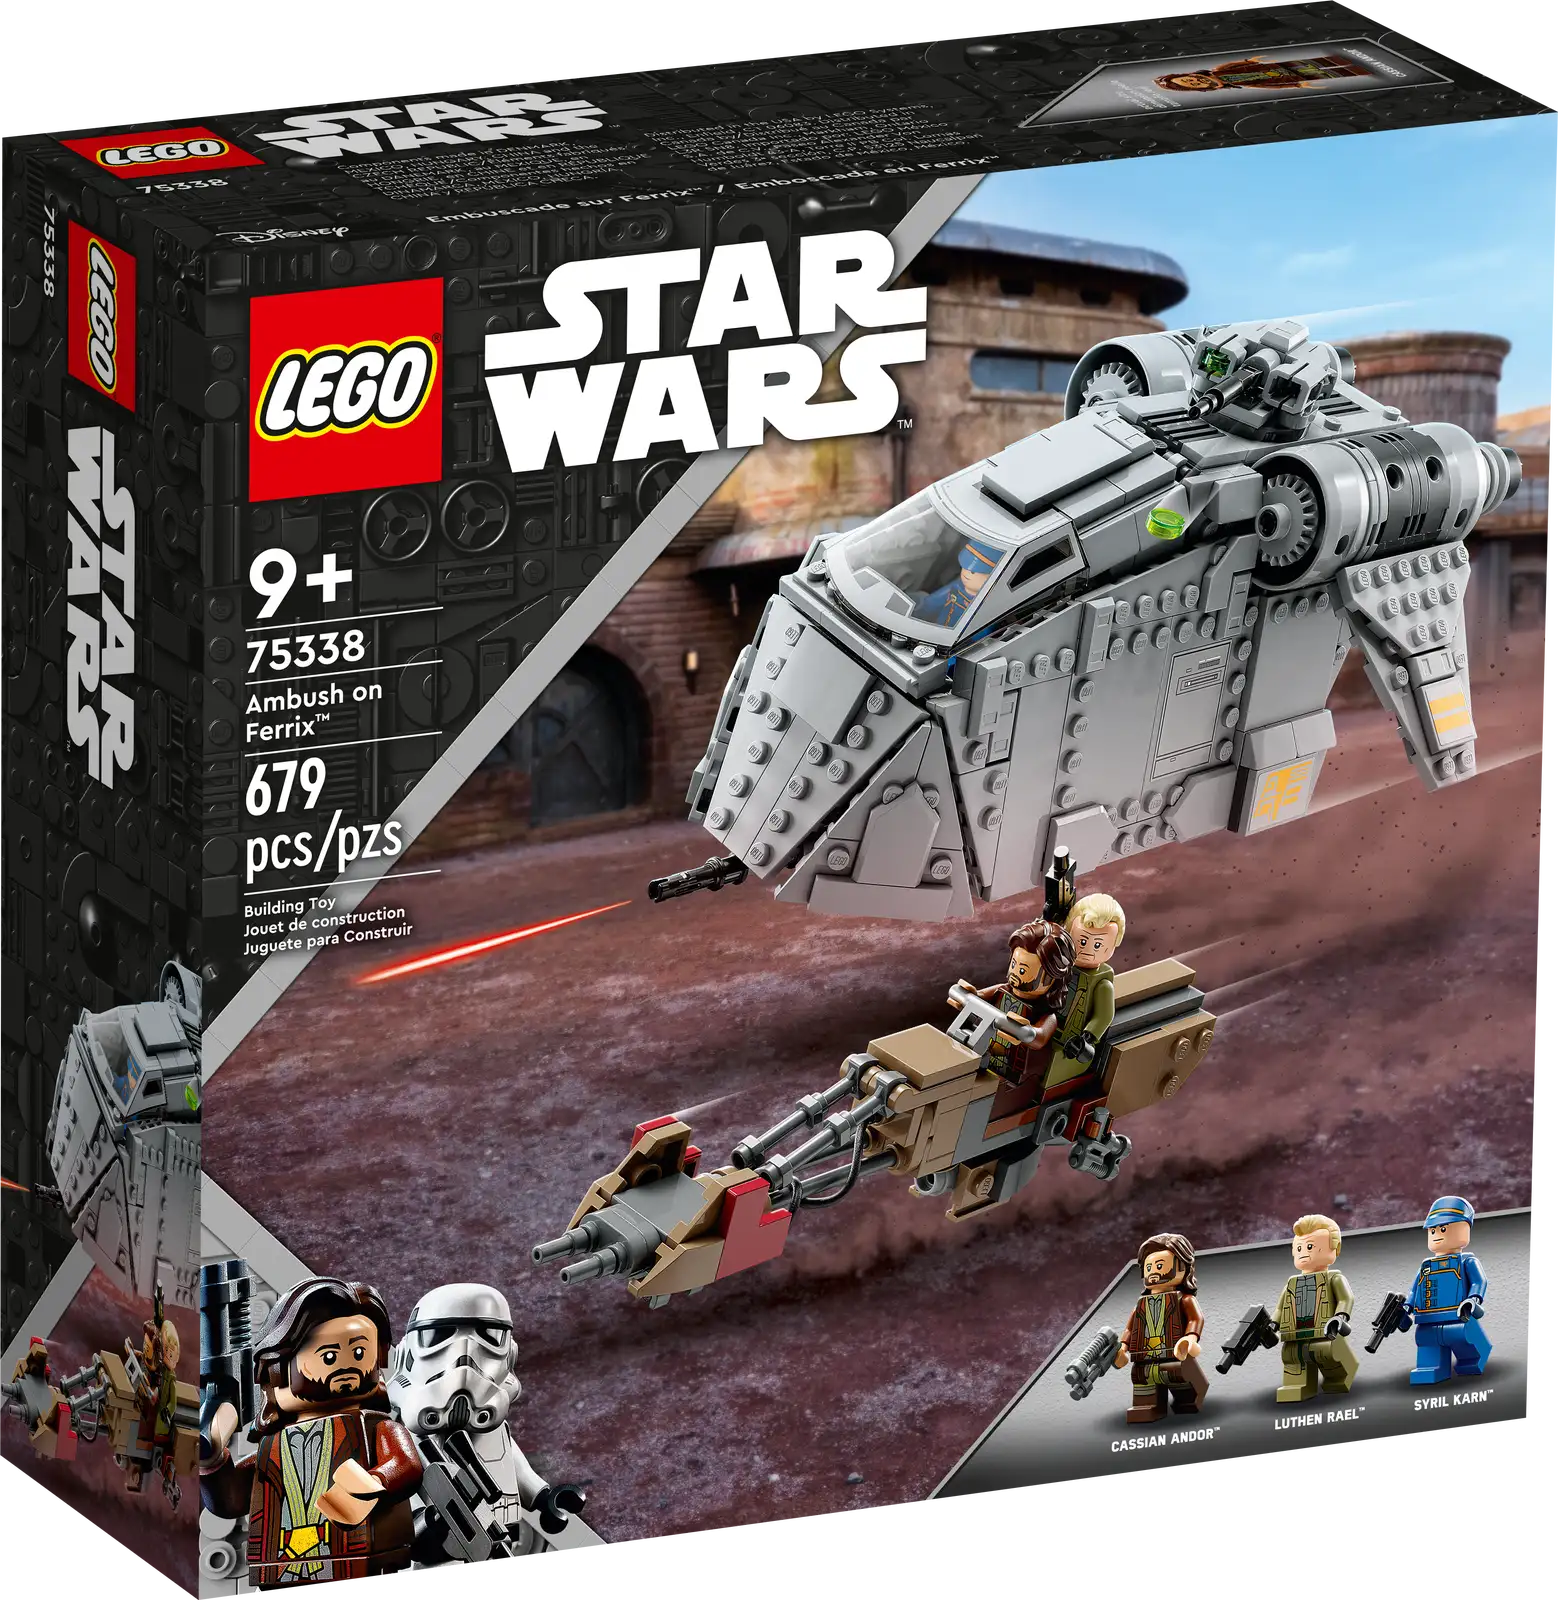 Star Wars: Andor fans can play out an action-packed Ambush on Ferrix with this LEGO® Star Wars™ (75338) set. It features a Mobile Tac-Pod with an opening top and side for easy access to the detailed interior, adjustable wings for flight and landing modes and a rotating double stud shooter, plus a speeder bike for Cassian Andor and Luthen Rael to ride on. There are 3 LEGO minifigures, each with a blaster pistol for battle play. App-assisted building This construction toy playset makes a top gift for kids aged 9 and up. Fun to build solo or with others, it comes with illustrated building instructions. And check out the LEGO Building Instructions app for digital instructions and intuitive viewing tools. Cool building toys The LEGO Group has been recreating iconic starships, vehicles, locations and characters from the Star Wars universe since 1999. There is a huge array of buildable models for play and display that will excite fans all ages. Buildable LEGO® Star Wars: Andor vehicle toy playset (75338) – Kids can play out an Ambush on Ferrix with this set, featuring a Mobile Tac-Pod, speeder bike and 3 Star Wars: Andor characters 3 LEGO® Star Wars™ minifigures – Cassian Andor, Luthen Rael and Syril Karn, each with blaster pistols for battle play Mobile Tac-Pod – Opening top and sides for access to the detailed interior, pilot seat, space for up to 5 LEGO® minifigures, adjustable wings, rotating double stud shooter and a rear access ramp Speeder bike – Seats for Cassian Andor and Luthen Rael, plus clips to attach their weapons Gift idea for ages 9 and up – Give this 679-piece set as a birthday or holiday gift to any Star Wars: Andor fan and creative kids who love LEGO® Star Wars™ buildable toy playsets Build together – Kids and their friends, siblings or parents can share the fun of building the Mobile Tac-Pod, which measures over 4.5 in. (11 cm) high, 9 in. (23 cm) long and 7 in. (17 cm) wide Printed and digital instructions – Step-by-step illustrated instructions are included and the LEGO® Building Instructions app offers digital instructions and interactive viewing tools Construction toys for all ages – LEGO® Star Wars™ sets allow kids and adult fans to recreate iconic scenes, invent original stories or simply display the brick-built models Quality assurance – LEGO® bricks and pieces meet stringent quality standards, ensuring that they are compatible and connect simply and securely Safety first – LEGO® components are dropped, heated, crushed, twisted and carefully analyzed to make sure that they comply with strict global safety standards